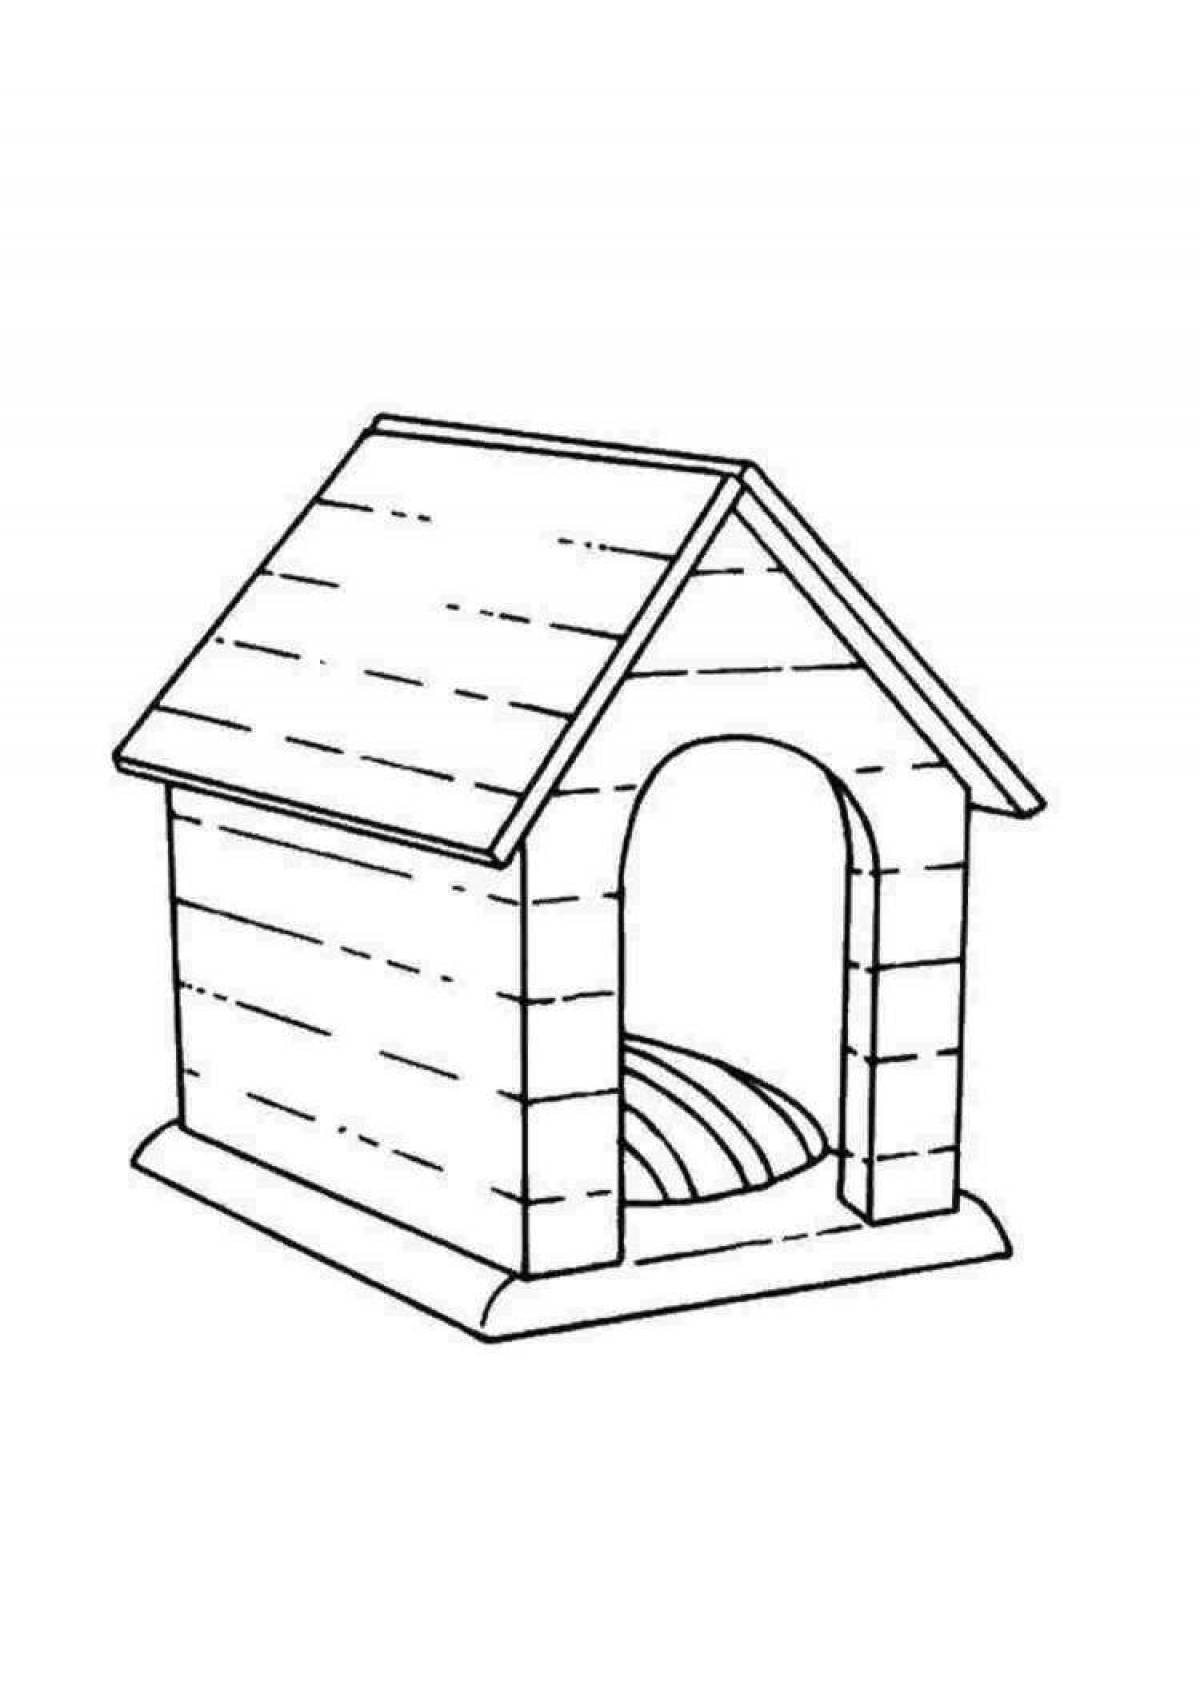 Coloring page dazzling dog house